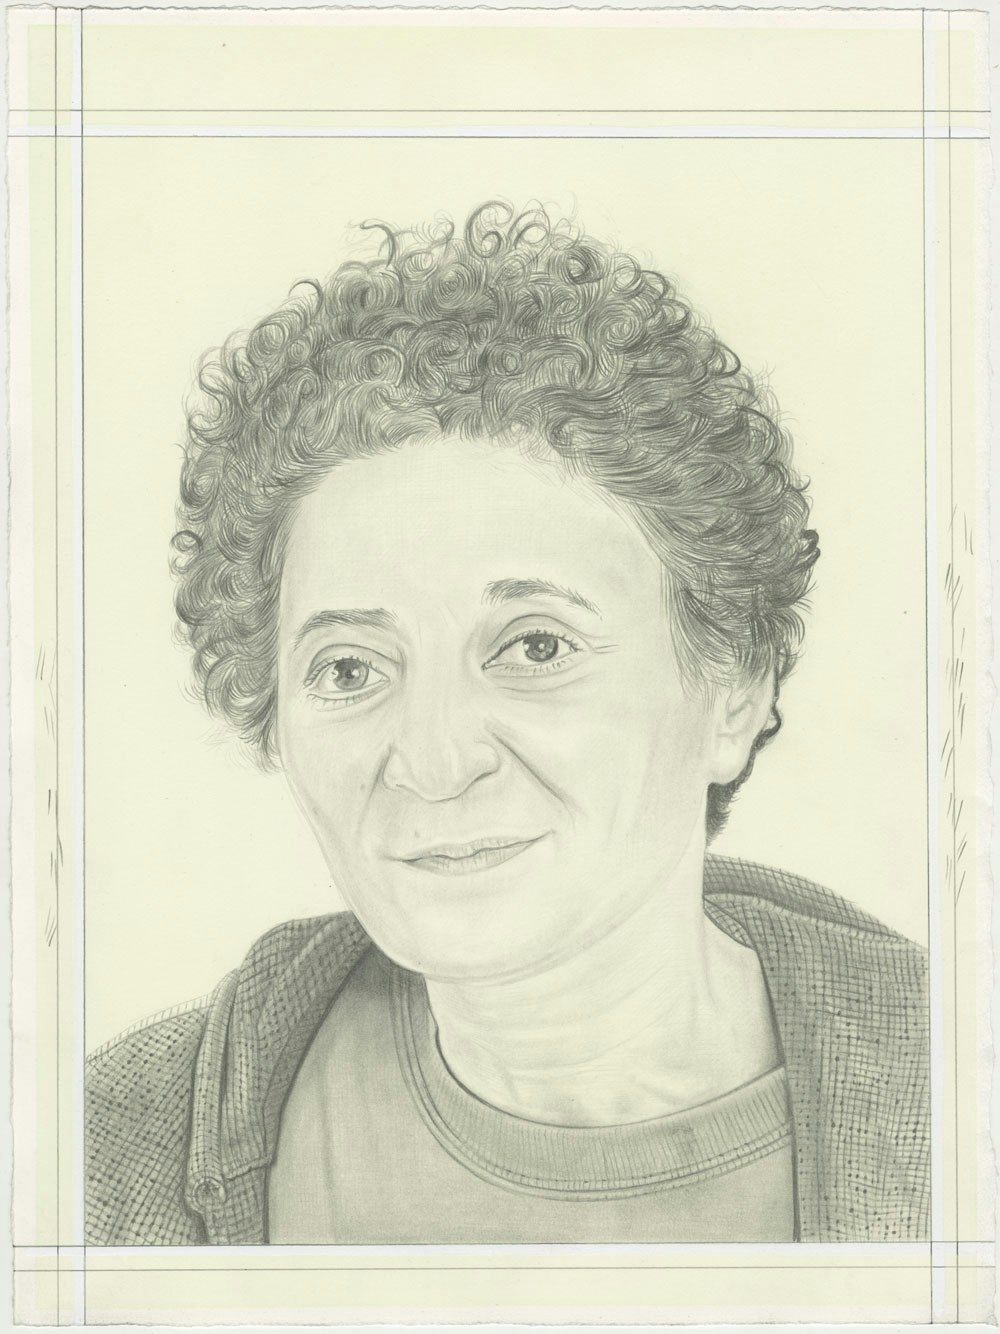 Portrait of Ghada Amer, pencil on paper by Phong H. Bui.